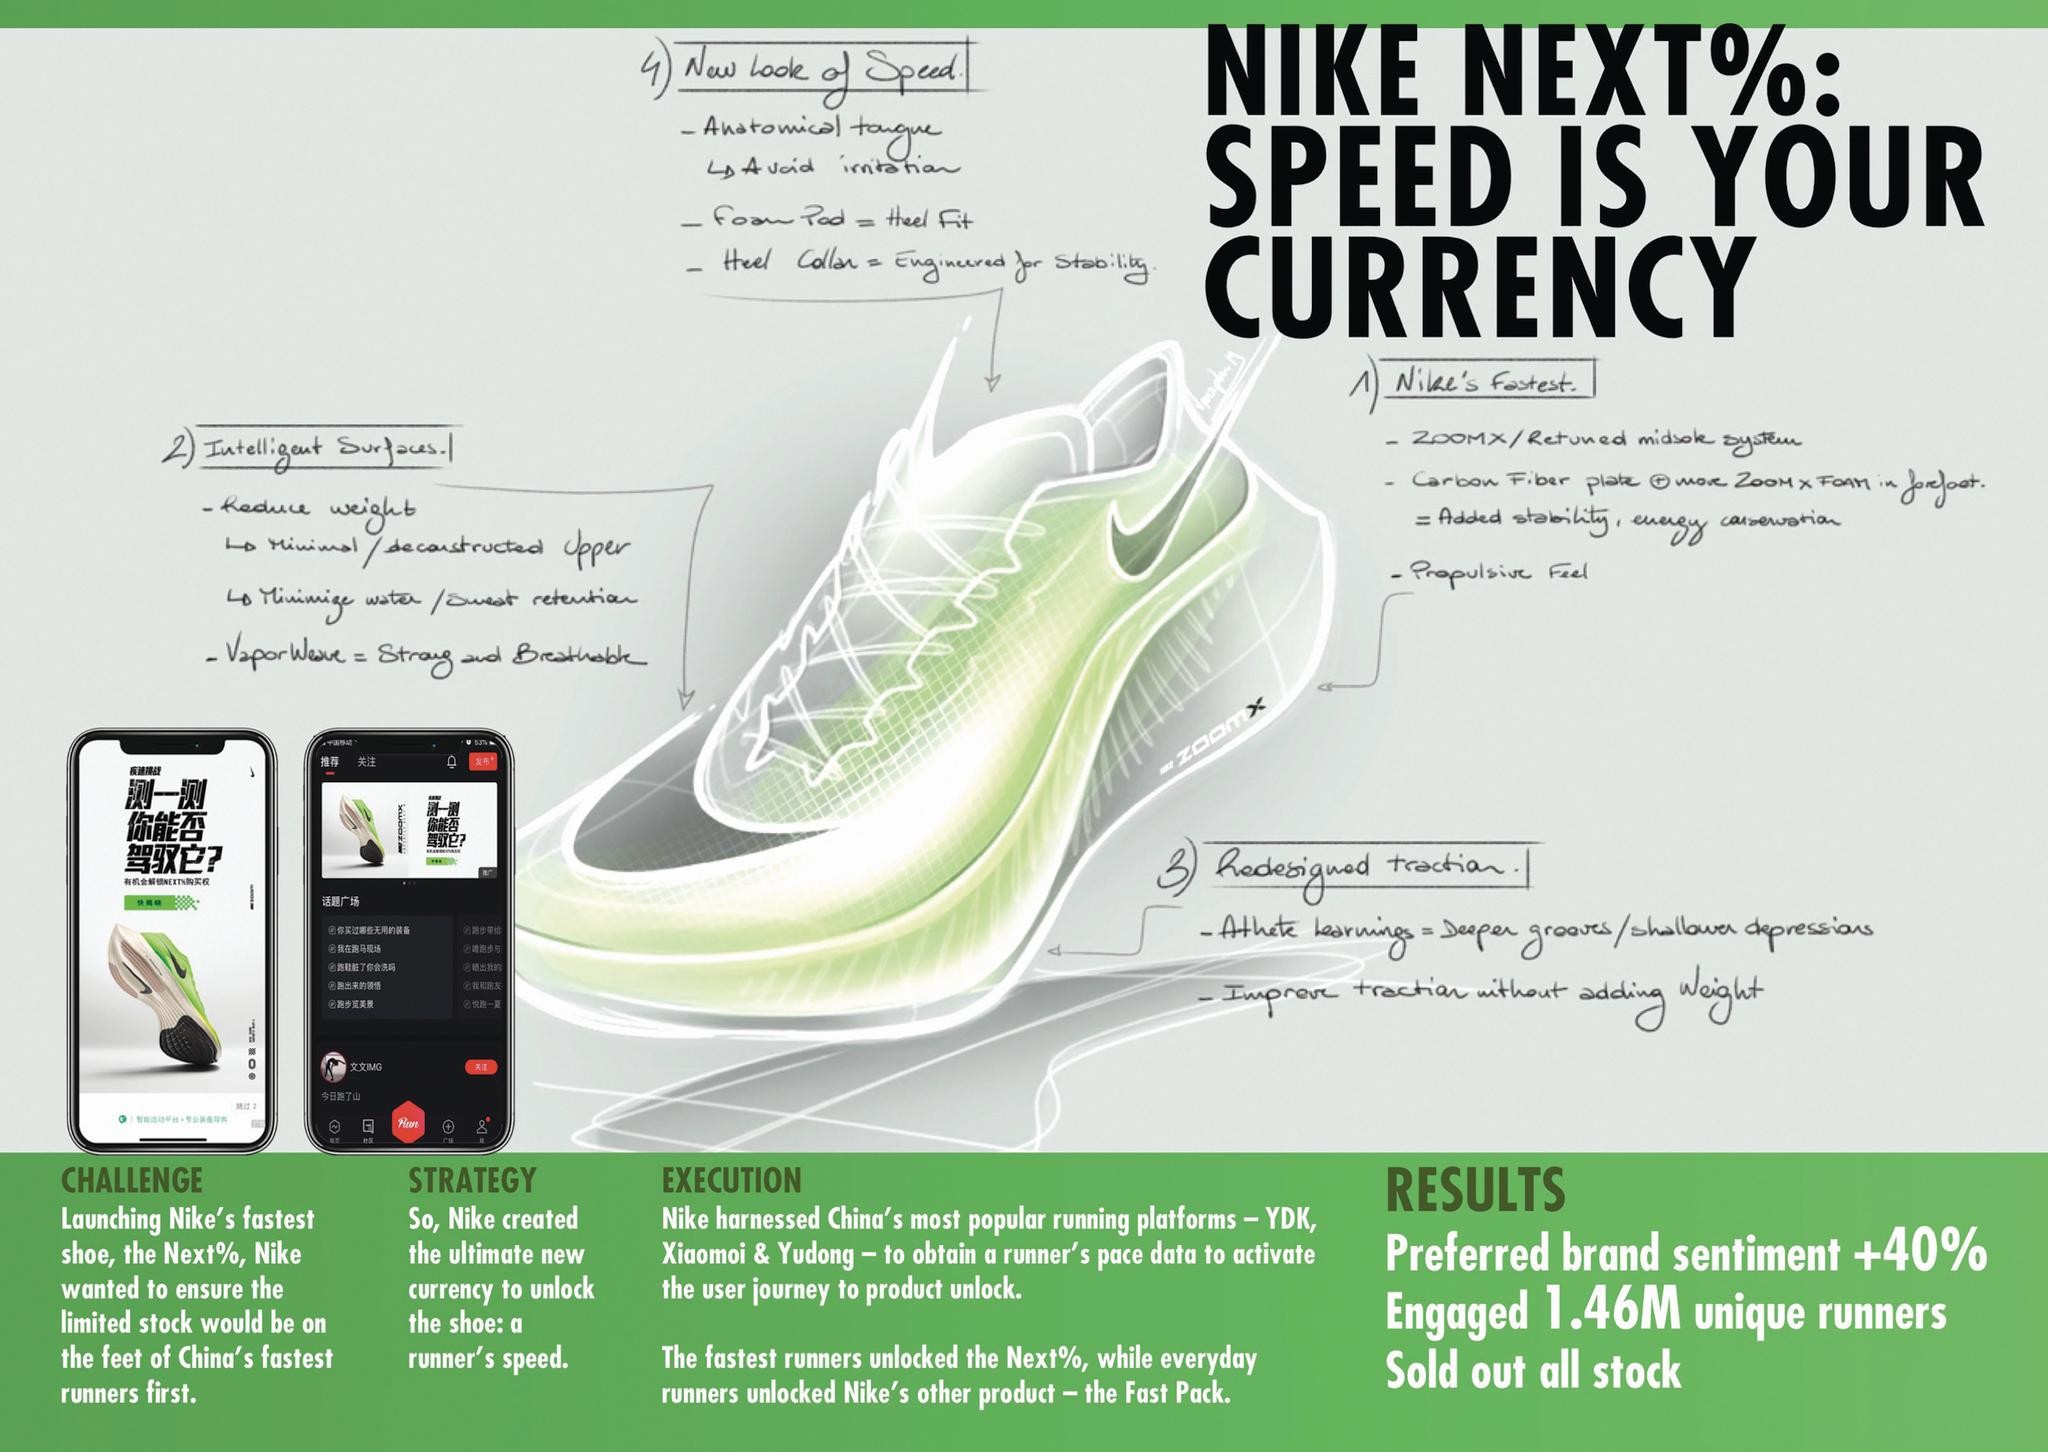 Nike Next%: Speed is Your Currency